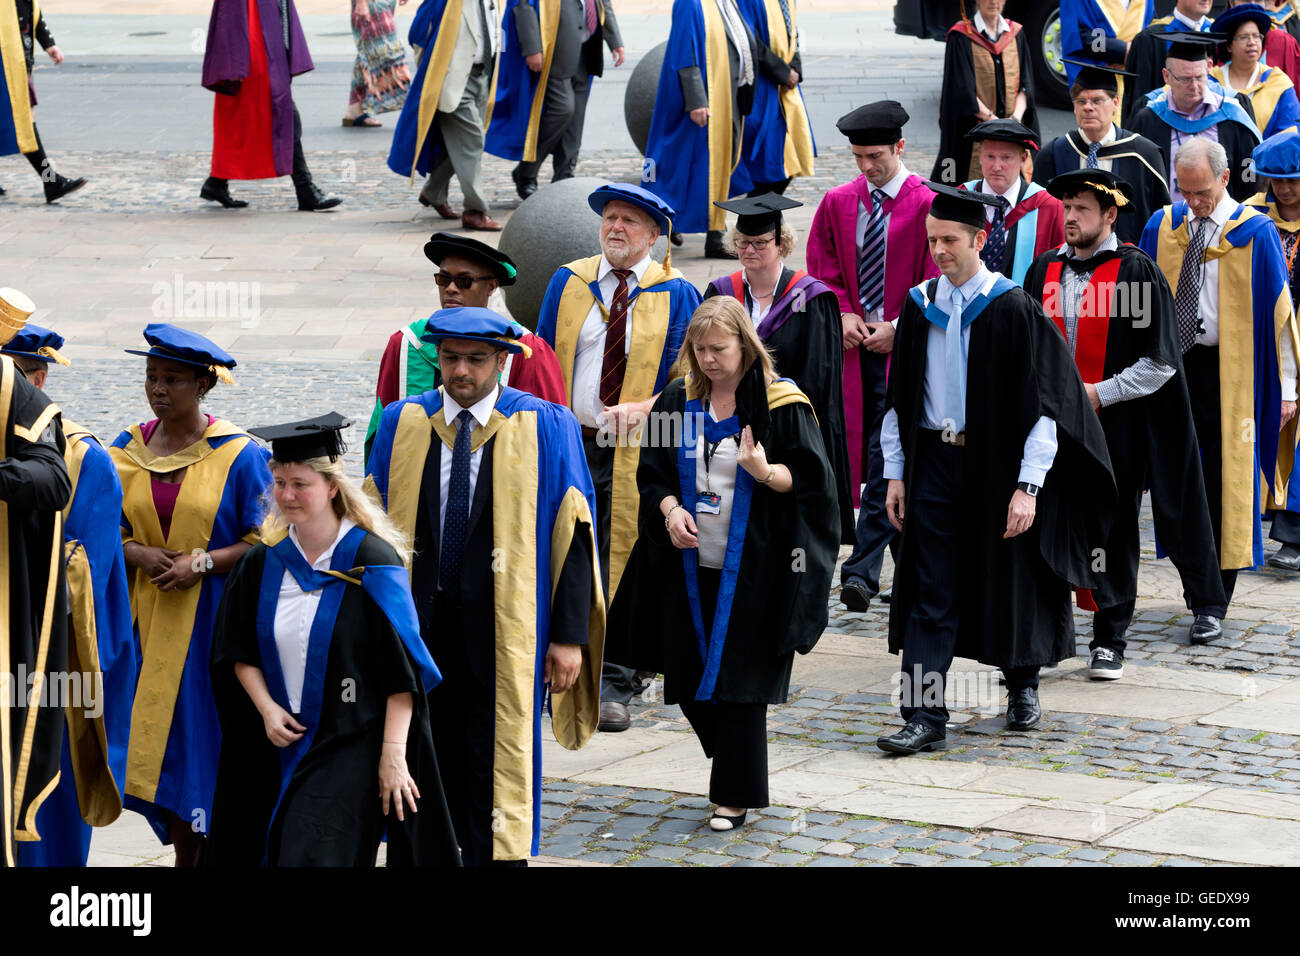 The procession of academics at Coventry University graduation day